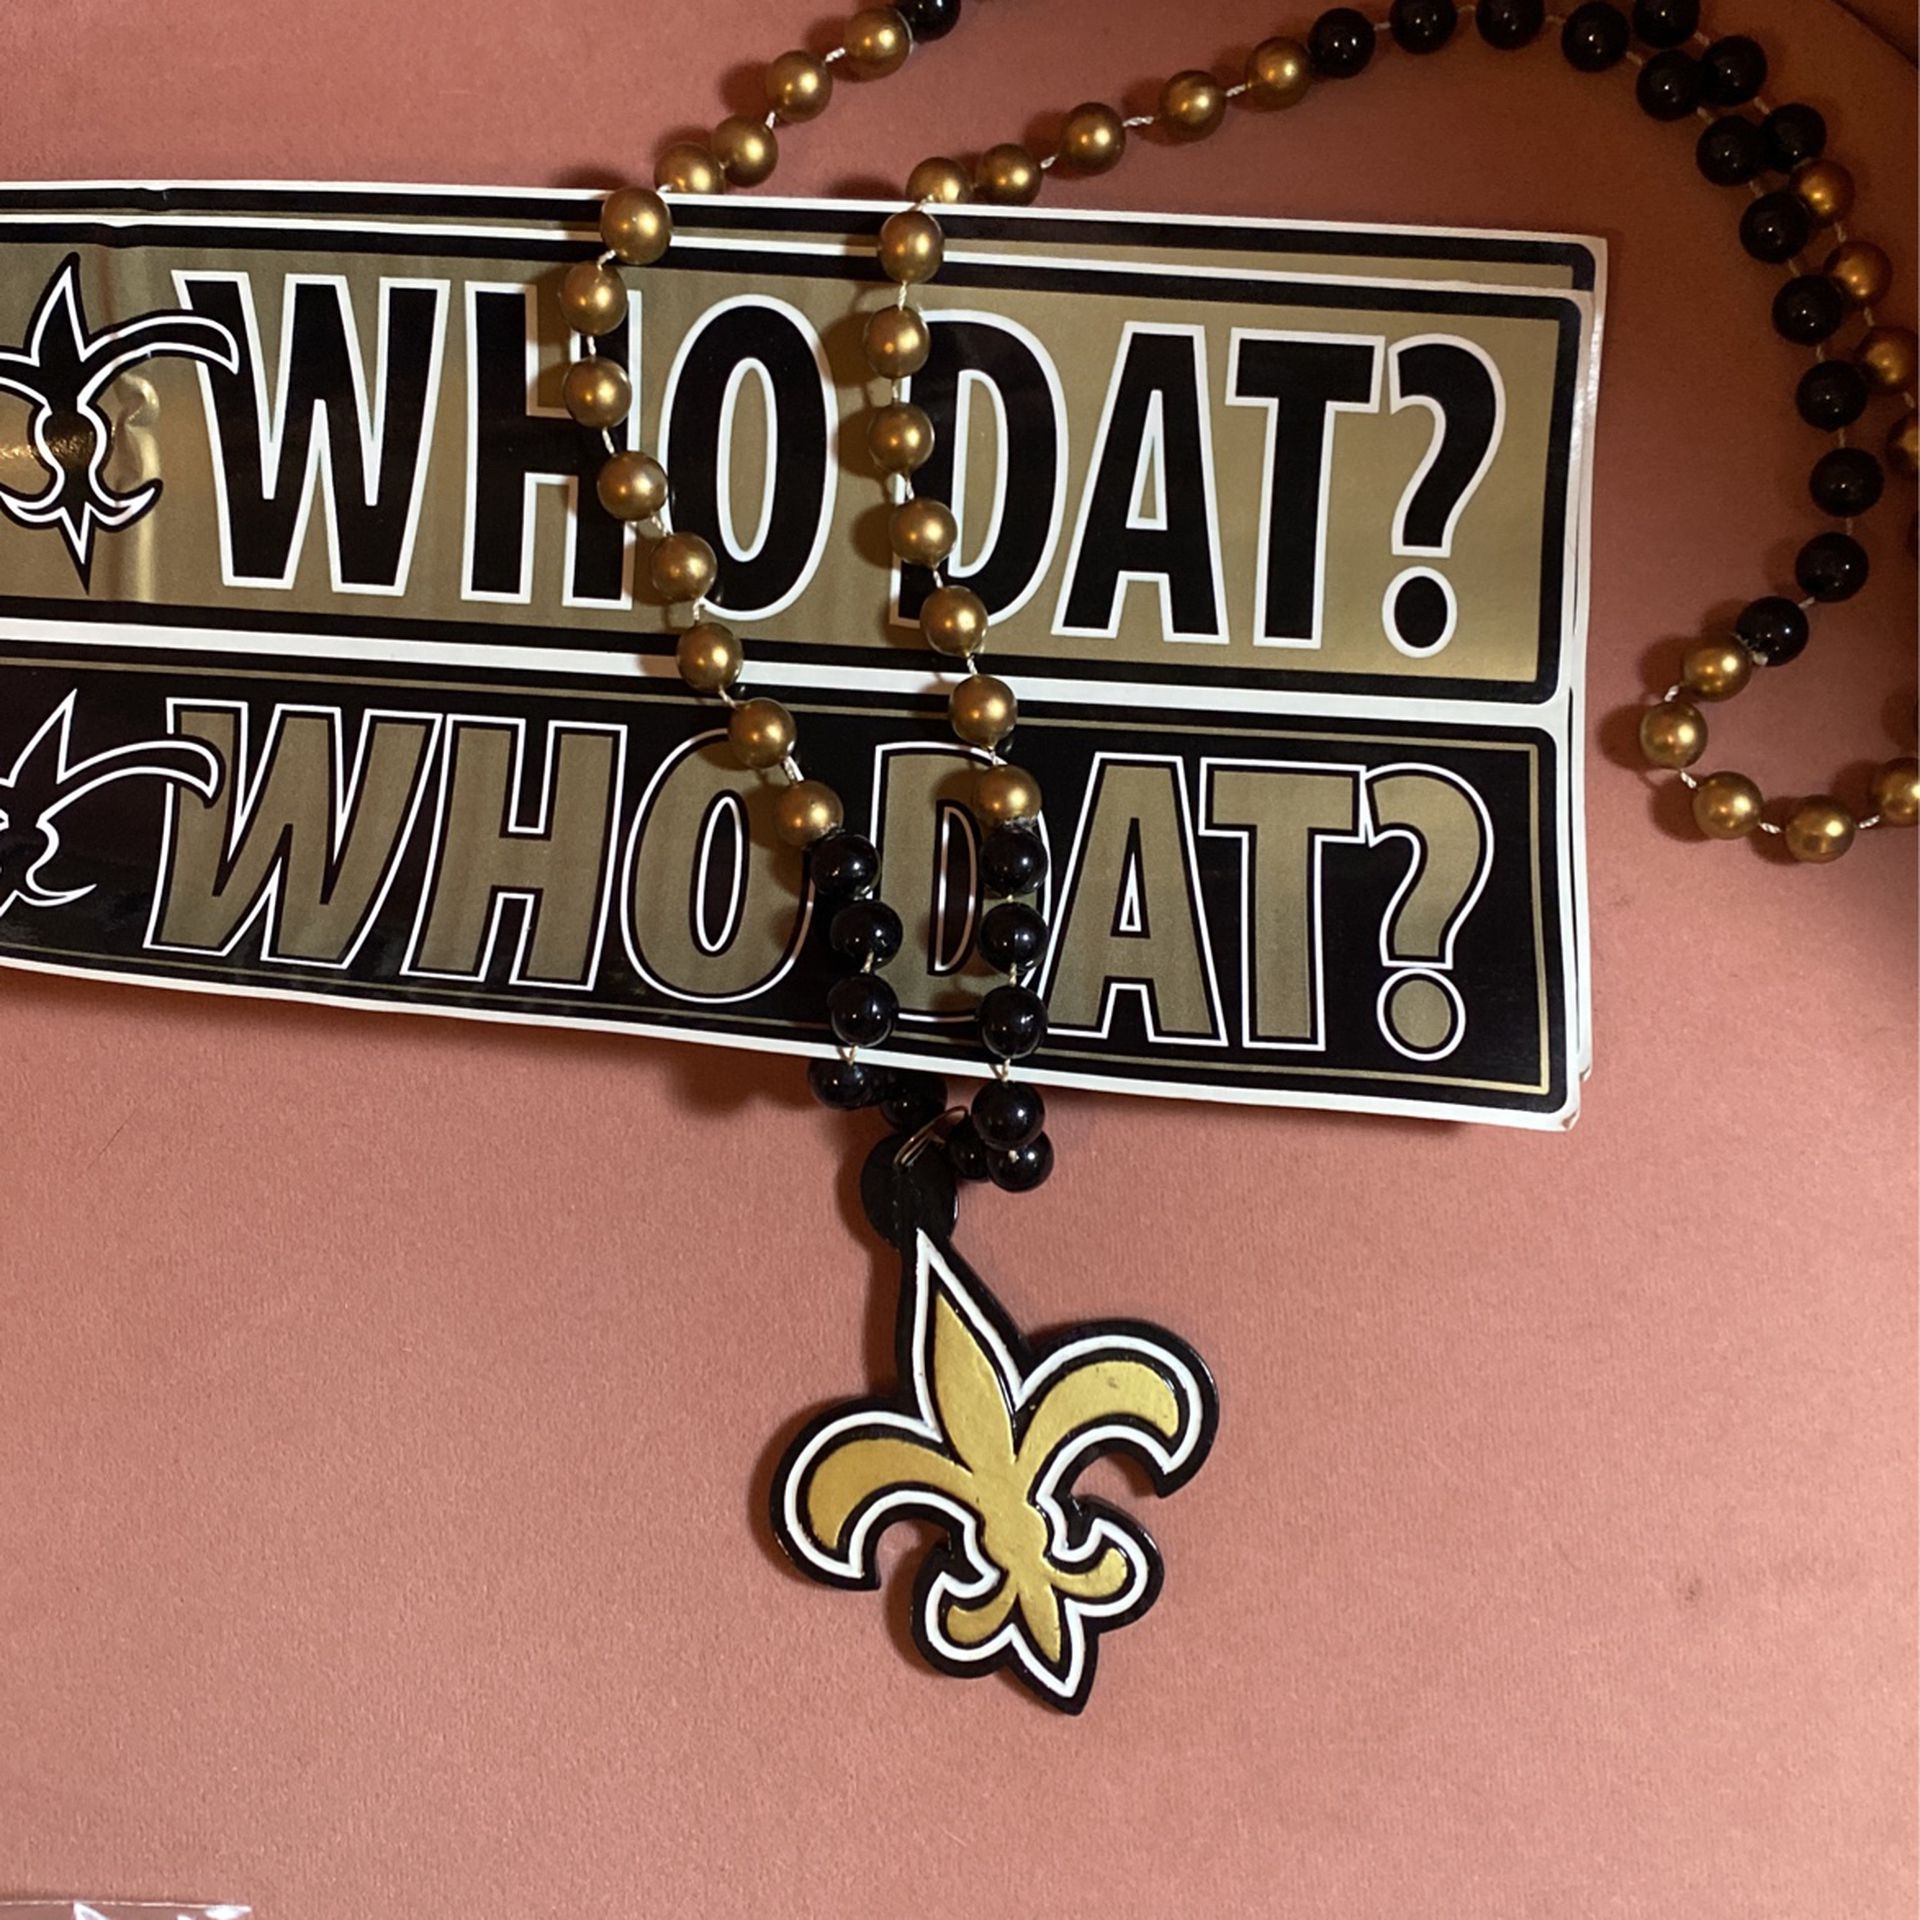 New Orleans Saints Stickers And Beads 